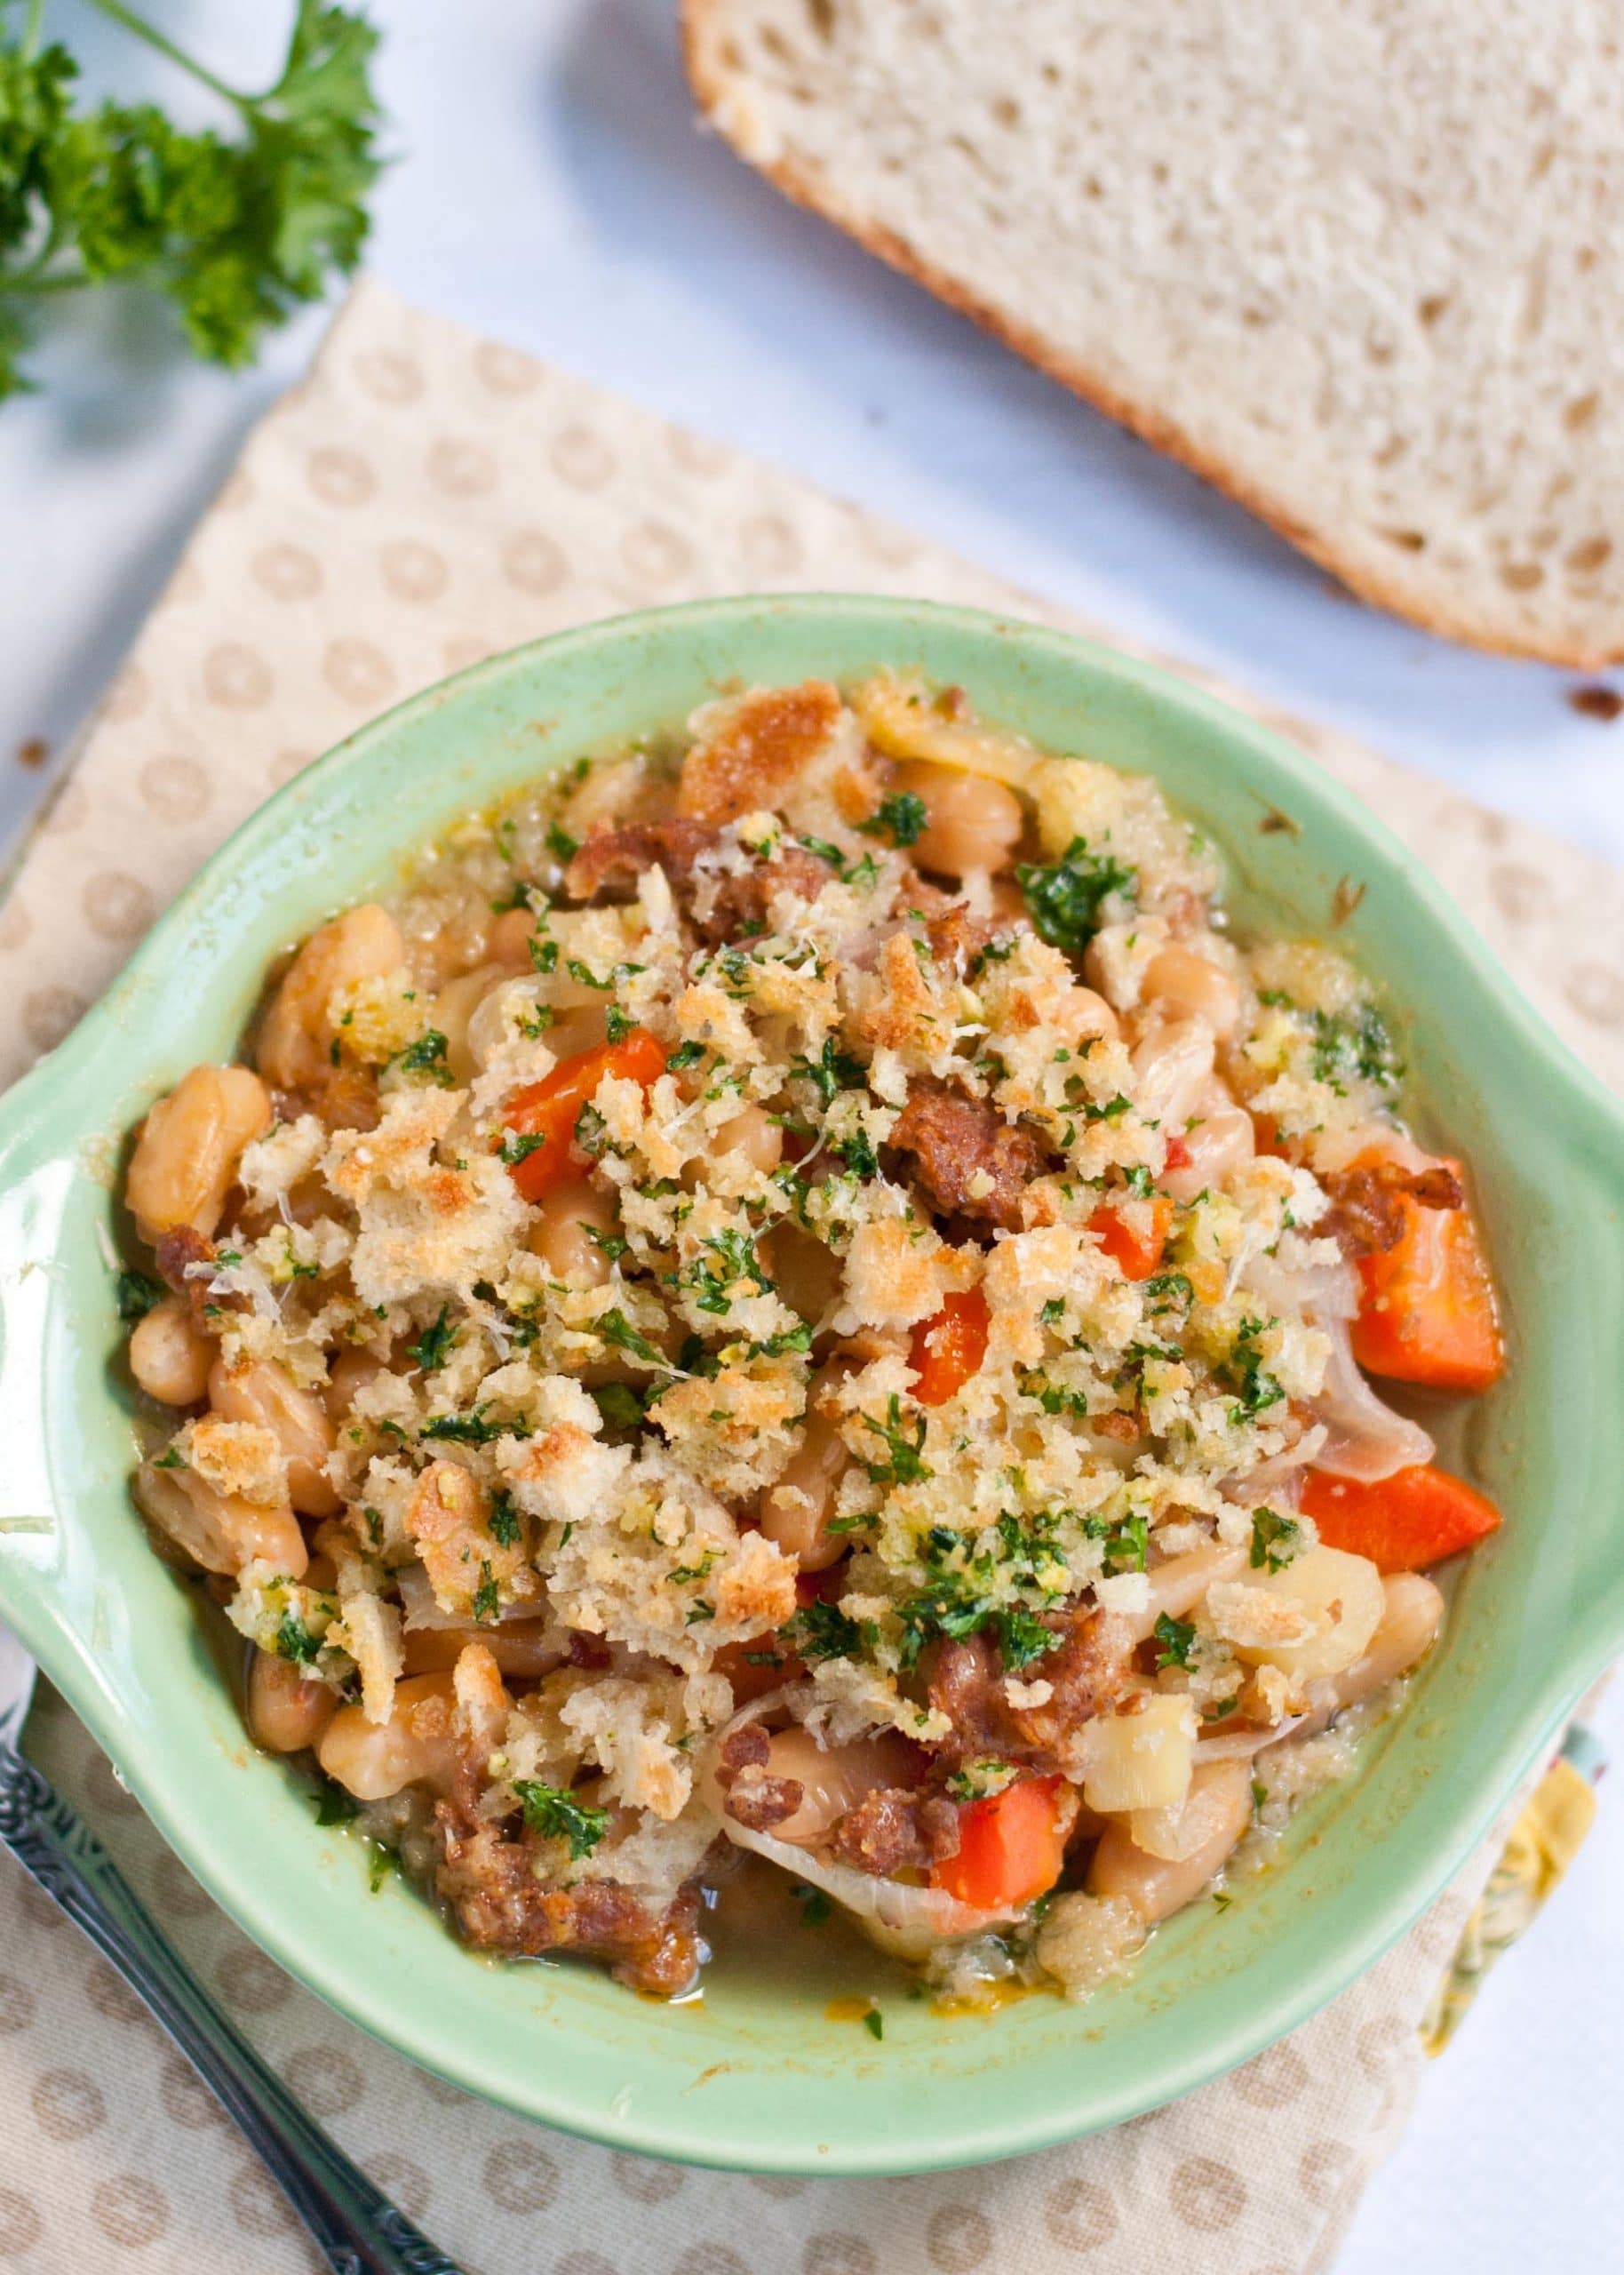 Cozy Cassoulet with Herbed Breadcrumb Topping